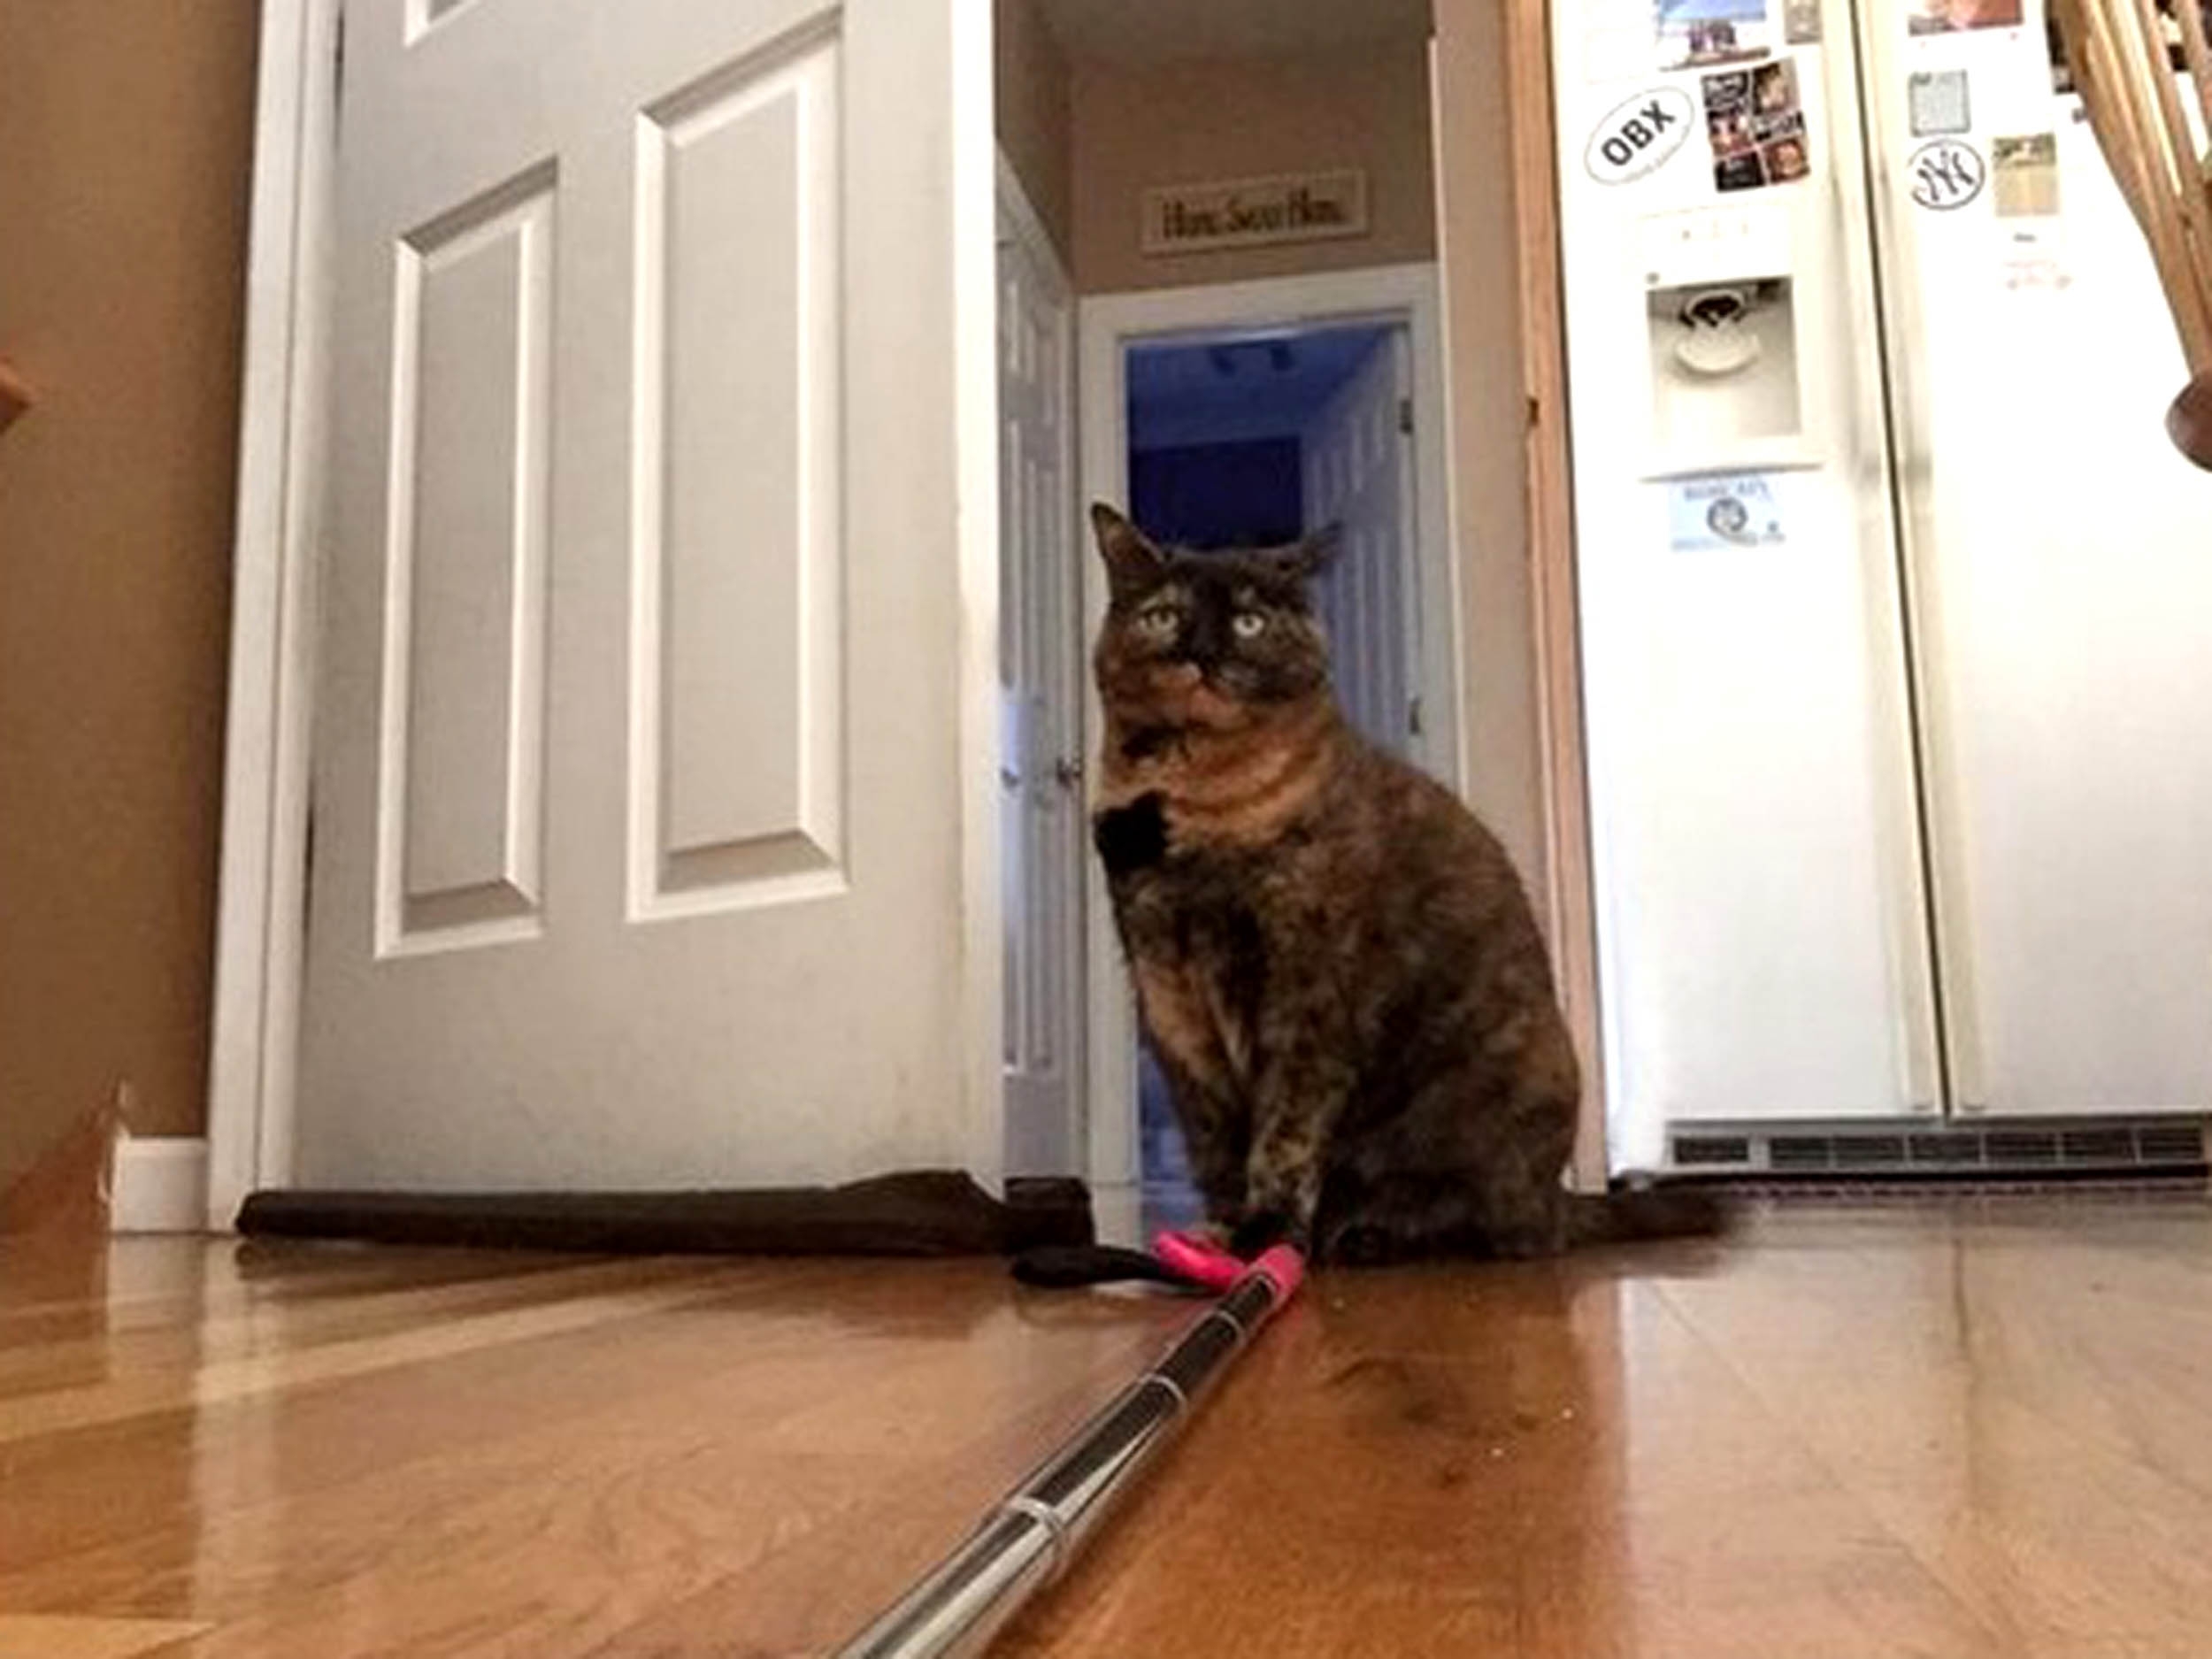 Cat triggers selfie stick PETS across the globe are getting in on the selfie phenomenon. Curious cats, dopey dogs and even ham-fisted hamsters are snapping themselves on their owners mobiles - with hilarious results. The pictures, which include a close-up of a one-eyed cat, all were produced when clumsy pets stood on their owners phones or iPads. The results are varied - some pictures show cats looking down into the camera with their chin appearing extremely enlarged, and in others a dogs nose takes up most of the photo.